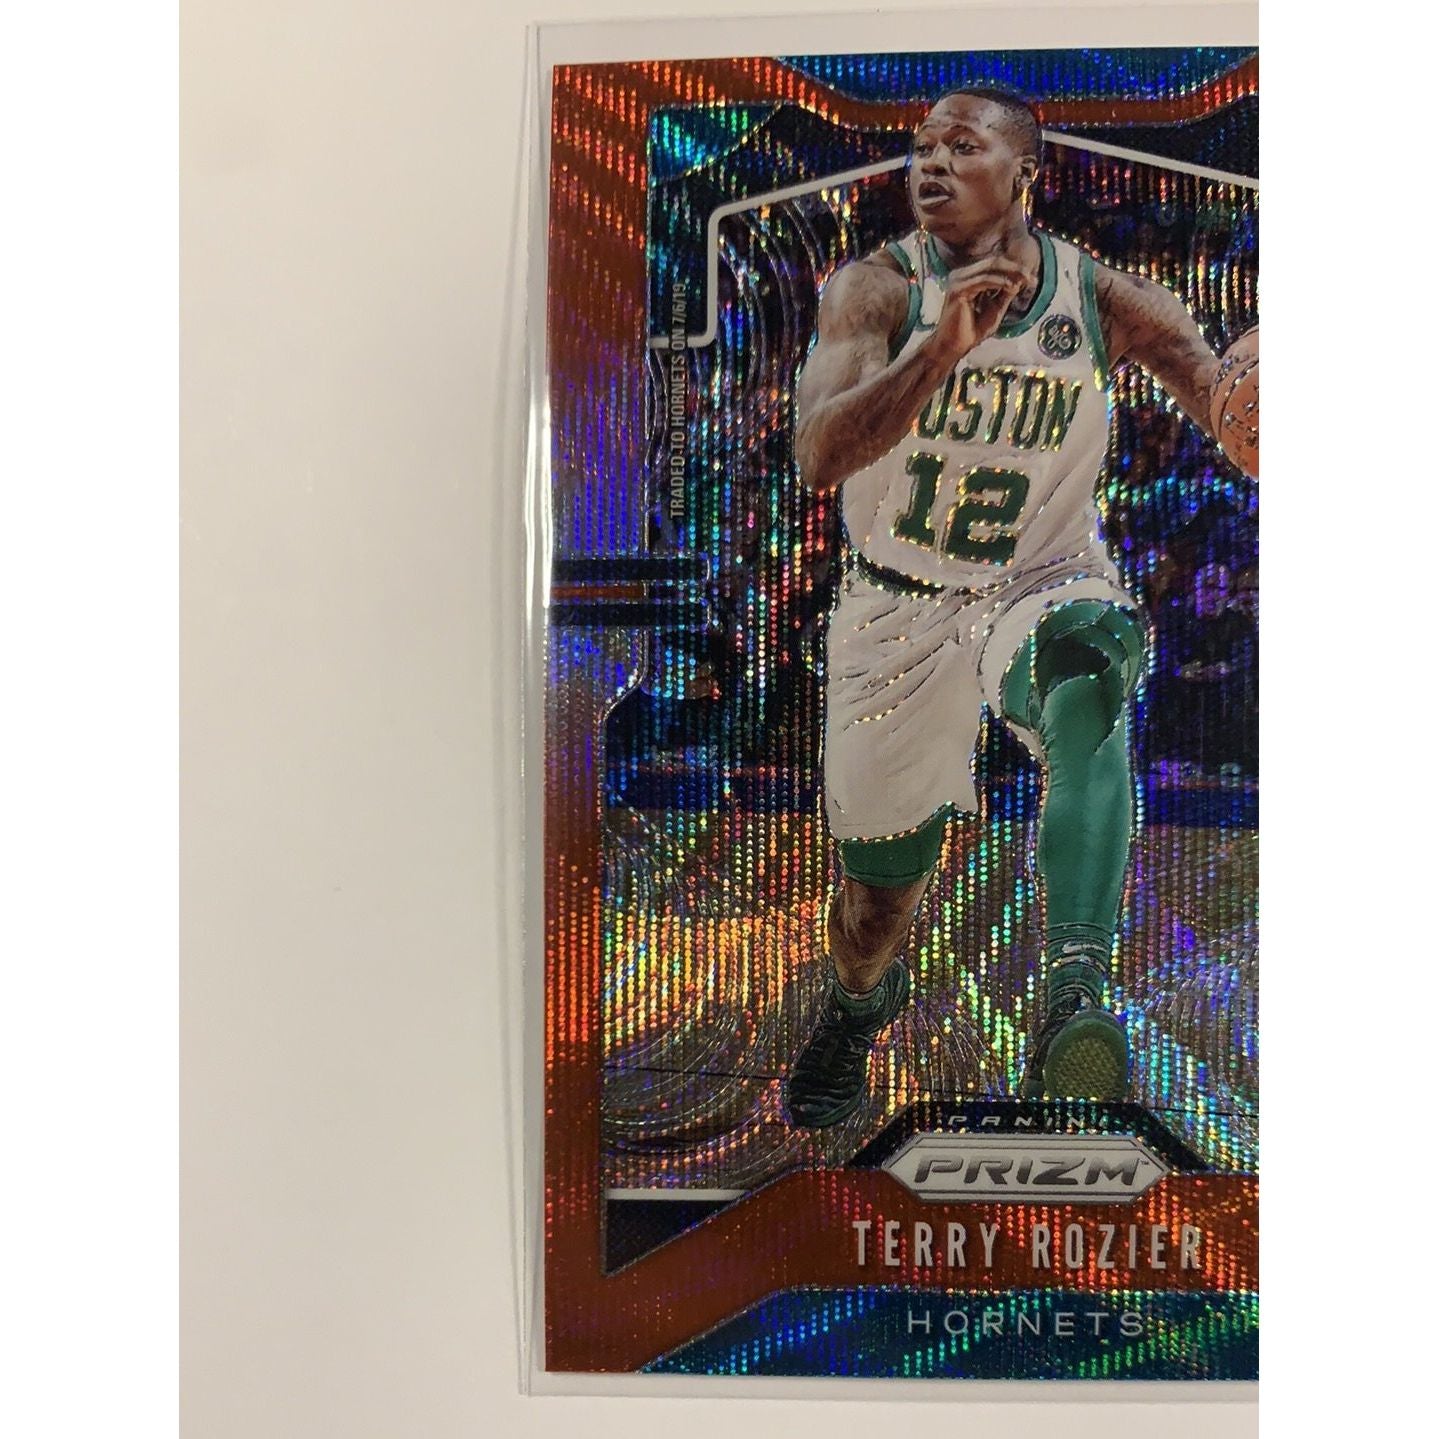  2019-20 Panini Prizm Terry Rozier Red and Blue Prizm  Local Legends Cards & Collectibles